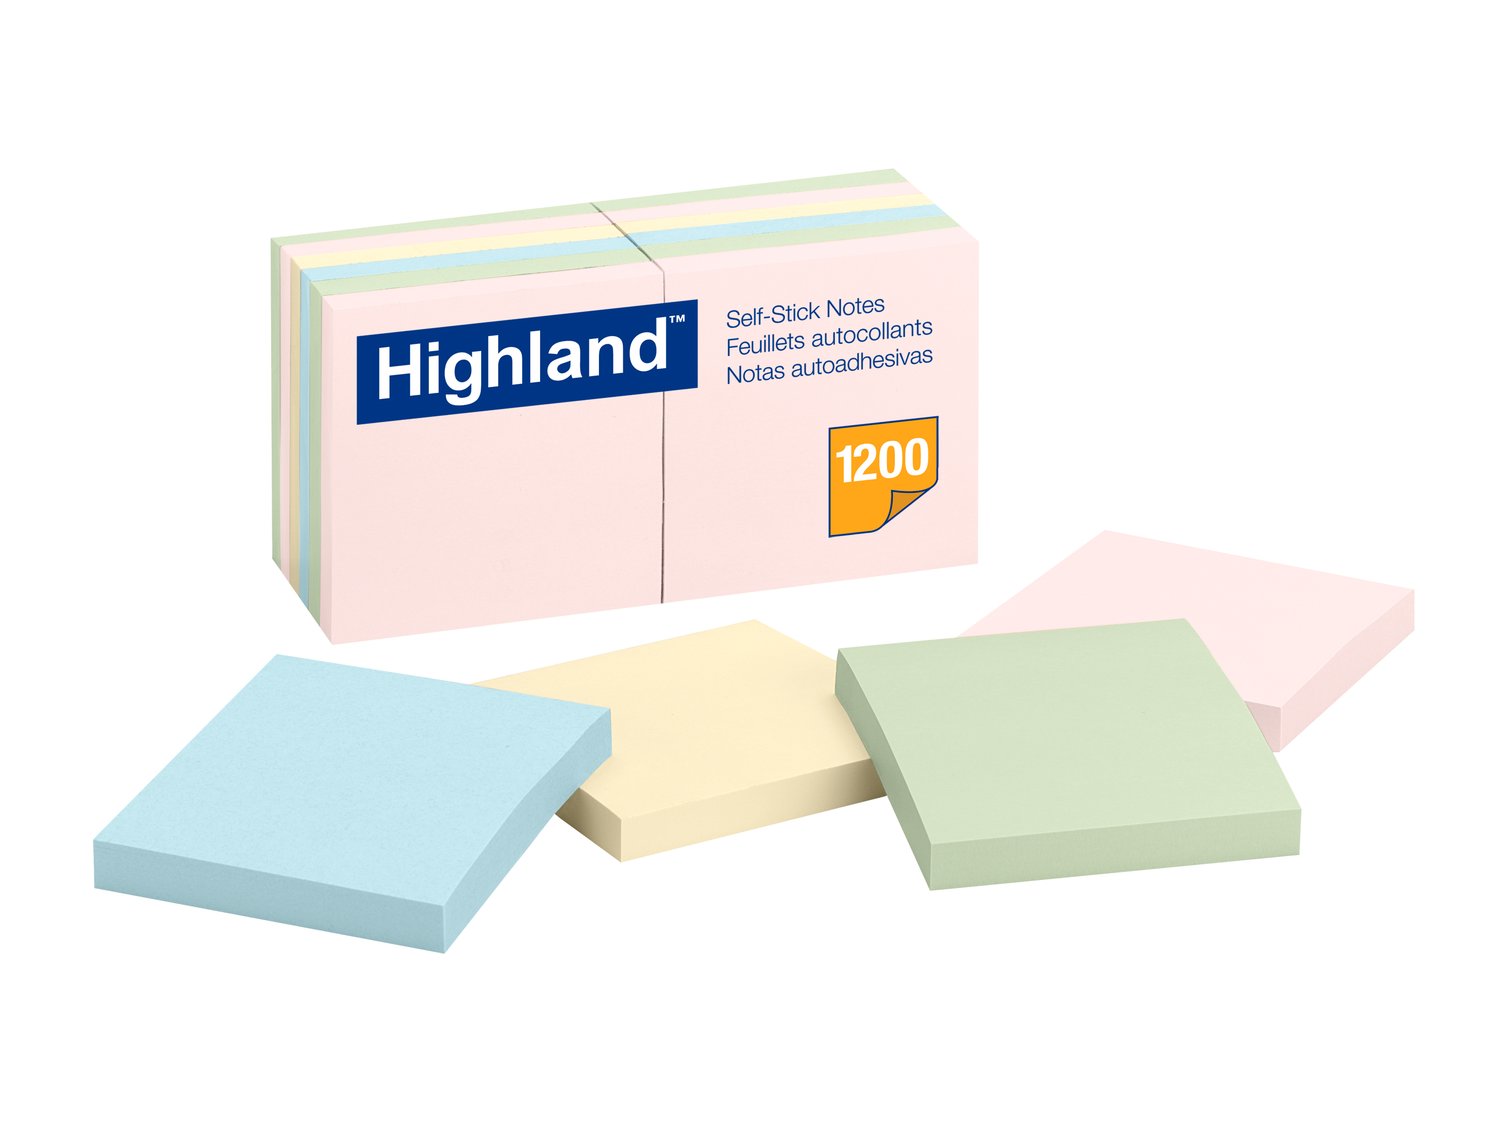 7000052687 - Highland Notes 6549A, 3 in x 3 in (7.62 cm x 7.62 cm)